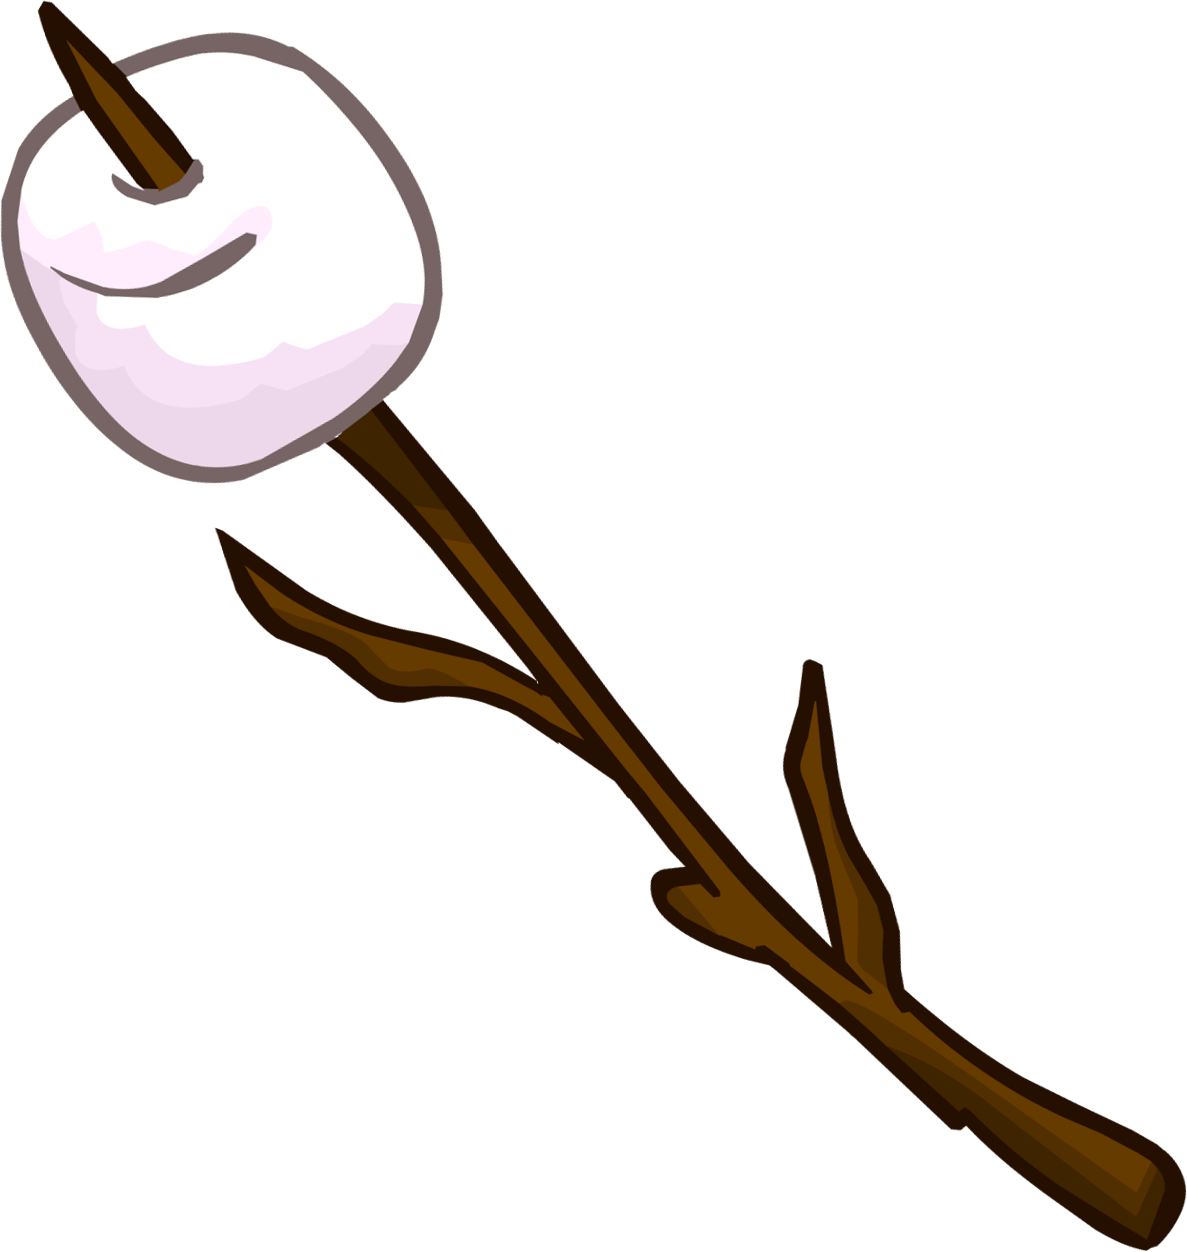 Pink Marshmallow on A Stick Clipart transparent PNG.